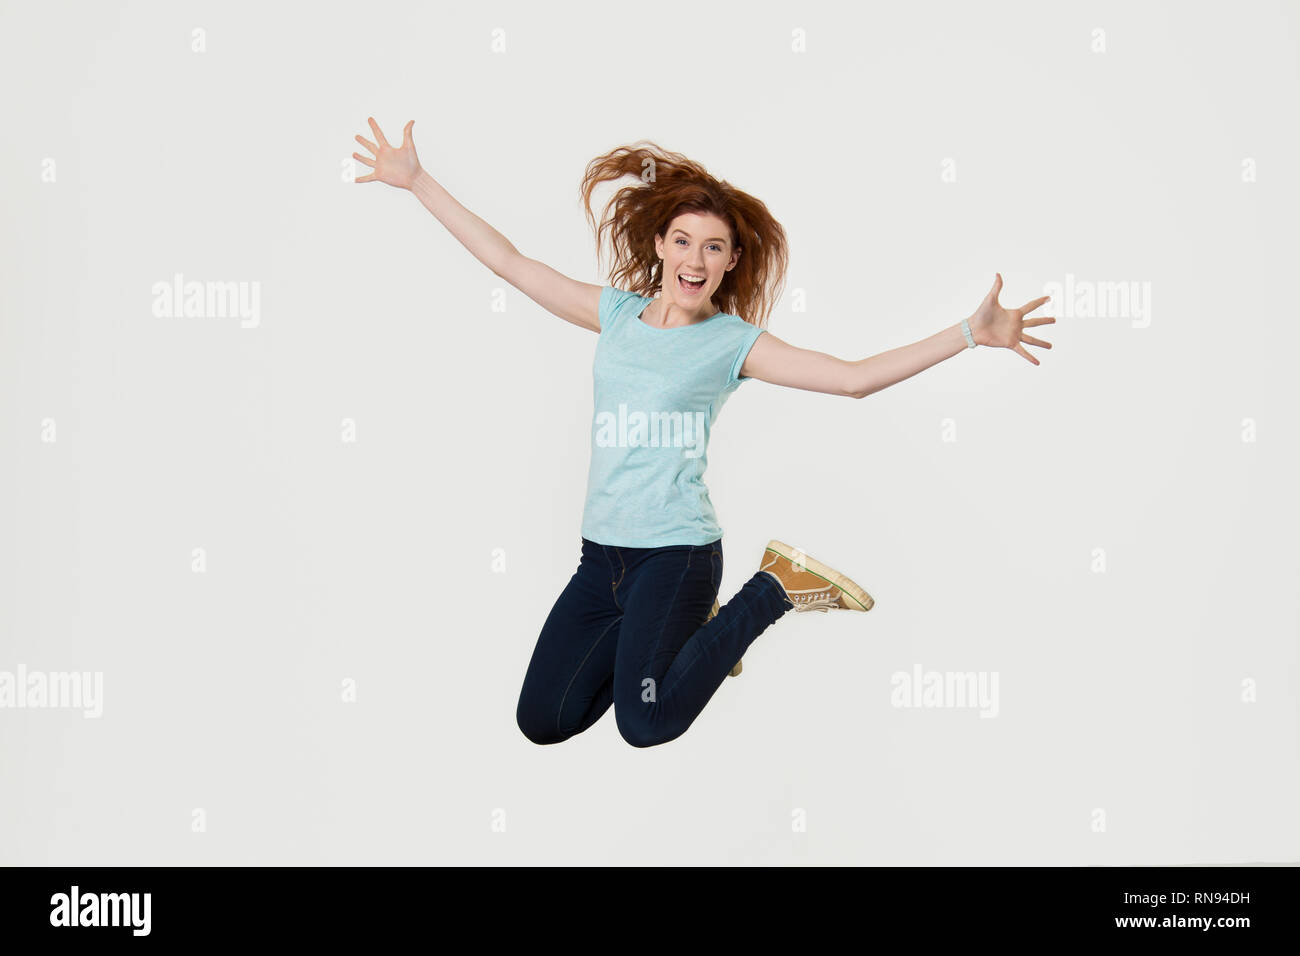 Happy active young woman jumping in air screaming with joy Stock Photo